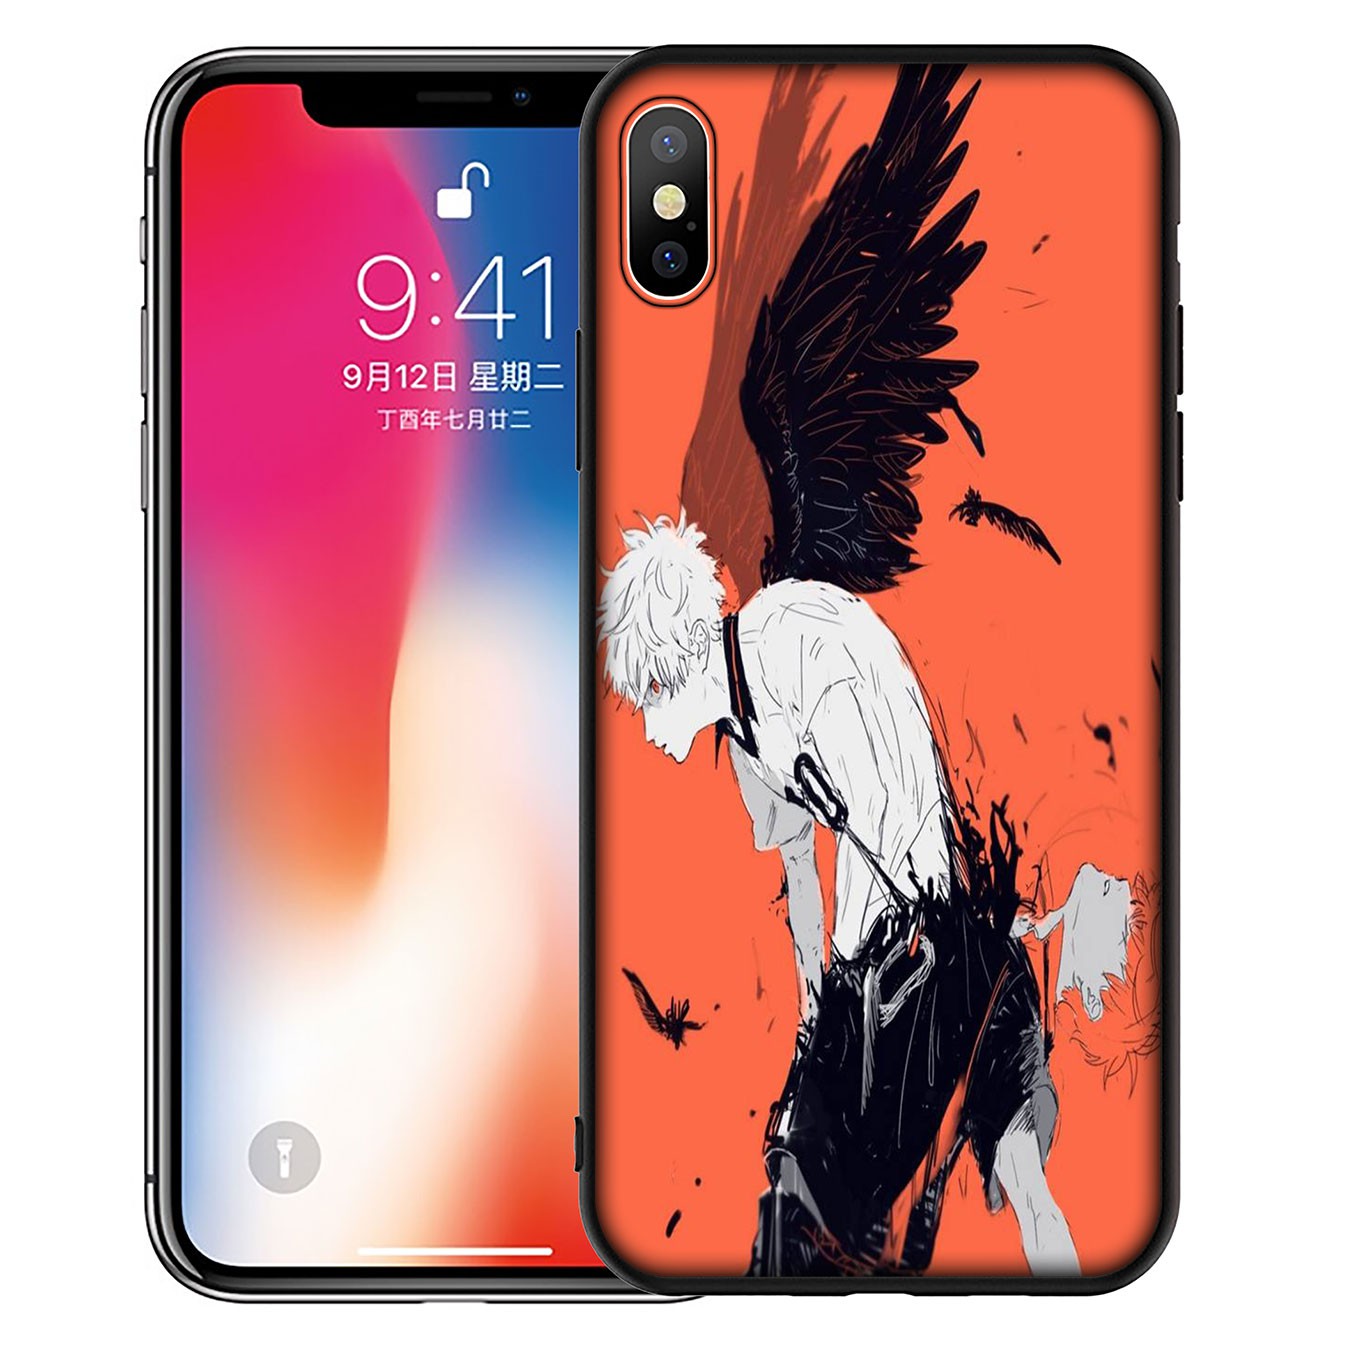 Samsung Galaxy S9 S10 S20 FE Ultra Plus Lite S20+ S9+ S10+ S20Plus Casing Soft Silicone Phone Case H48 Haikyuu Attacks volleyball Anime Cover